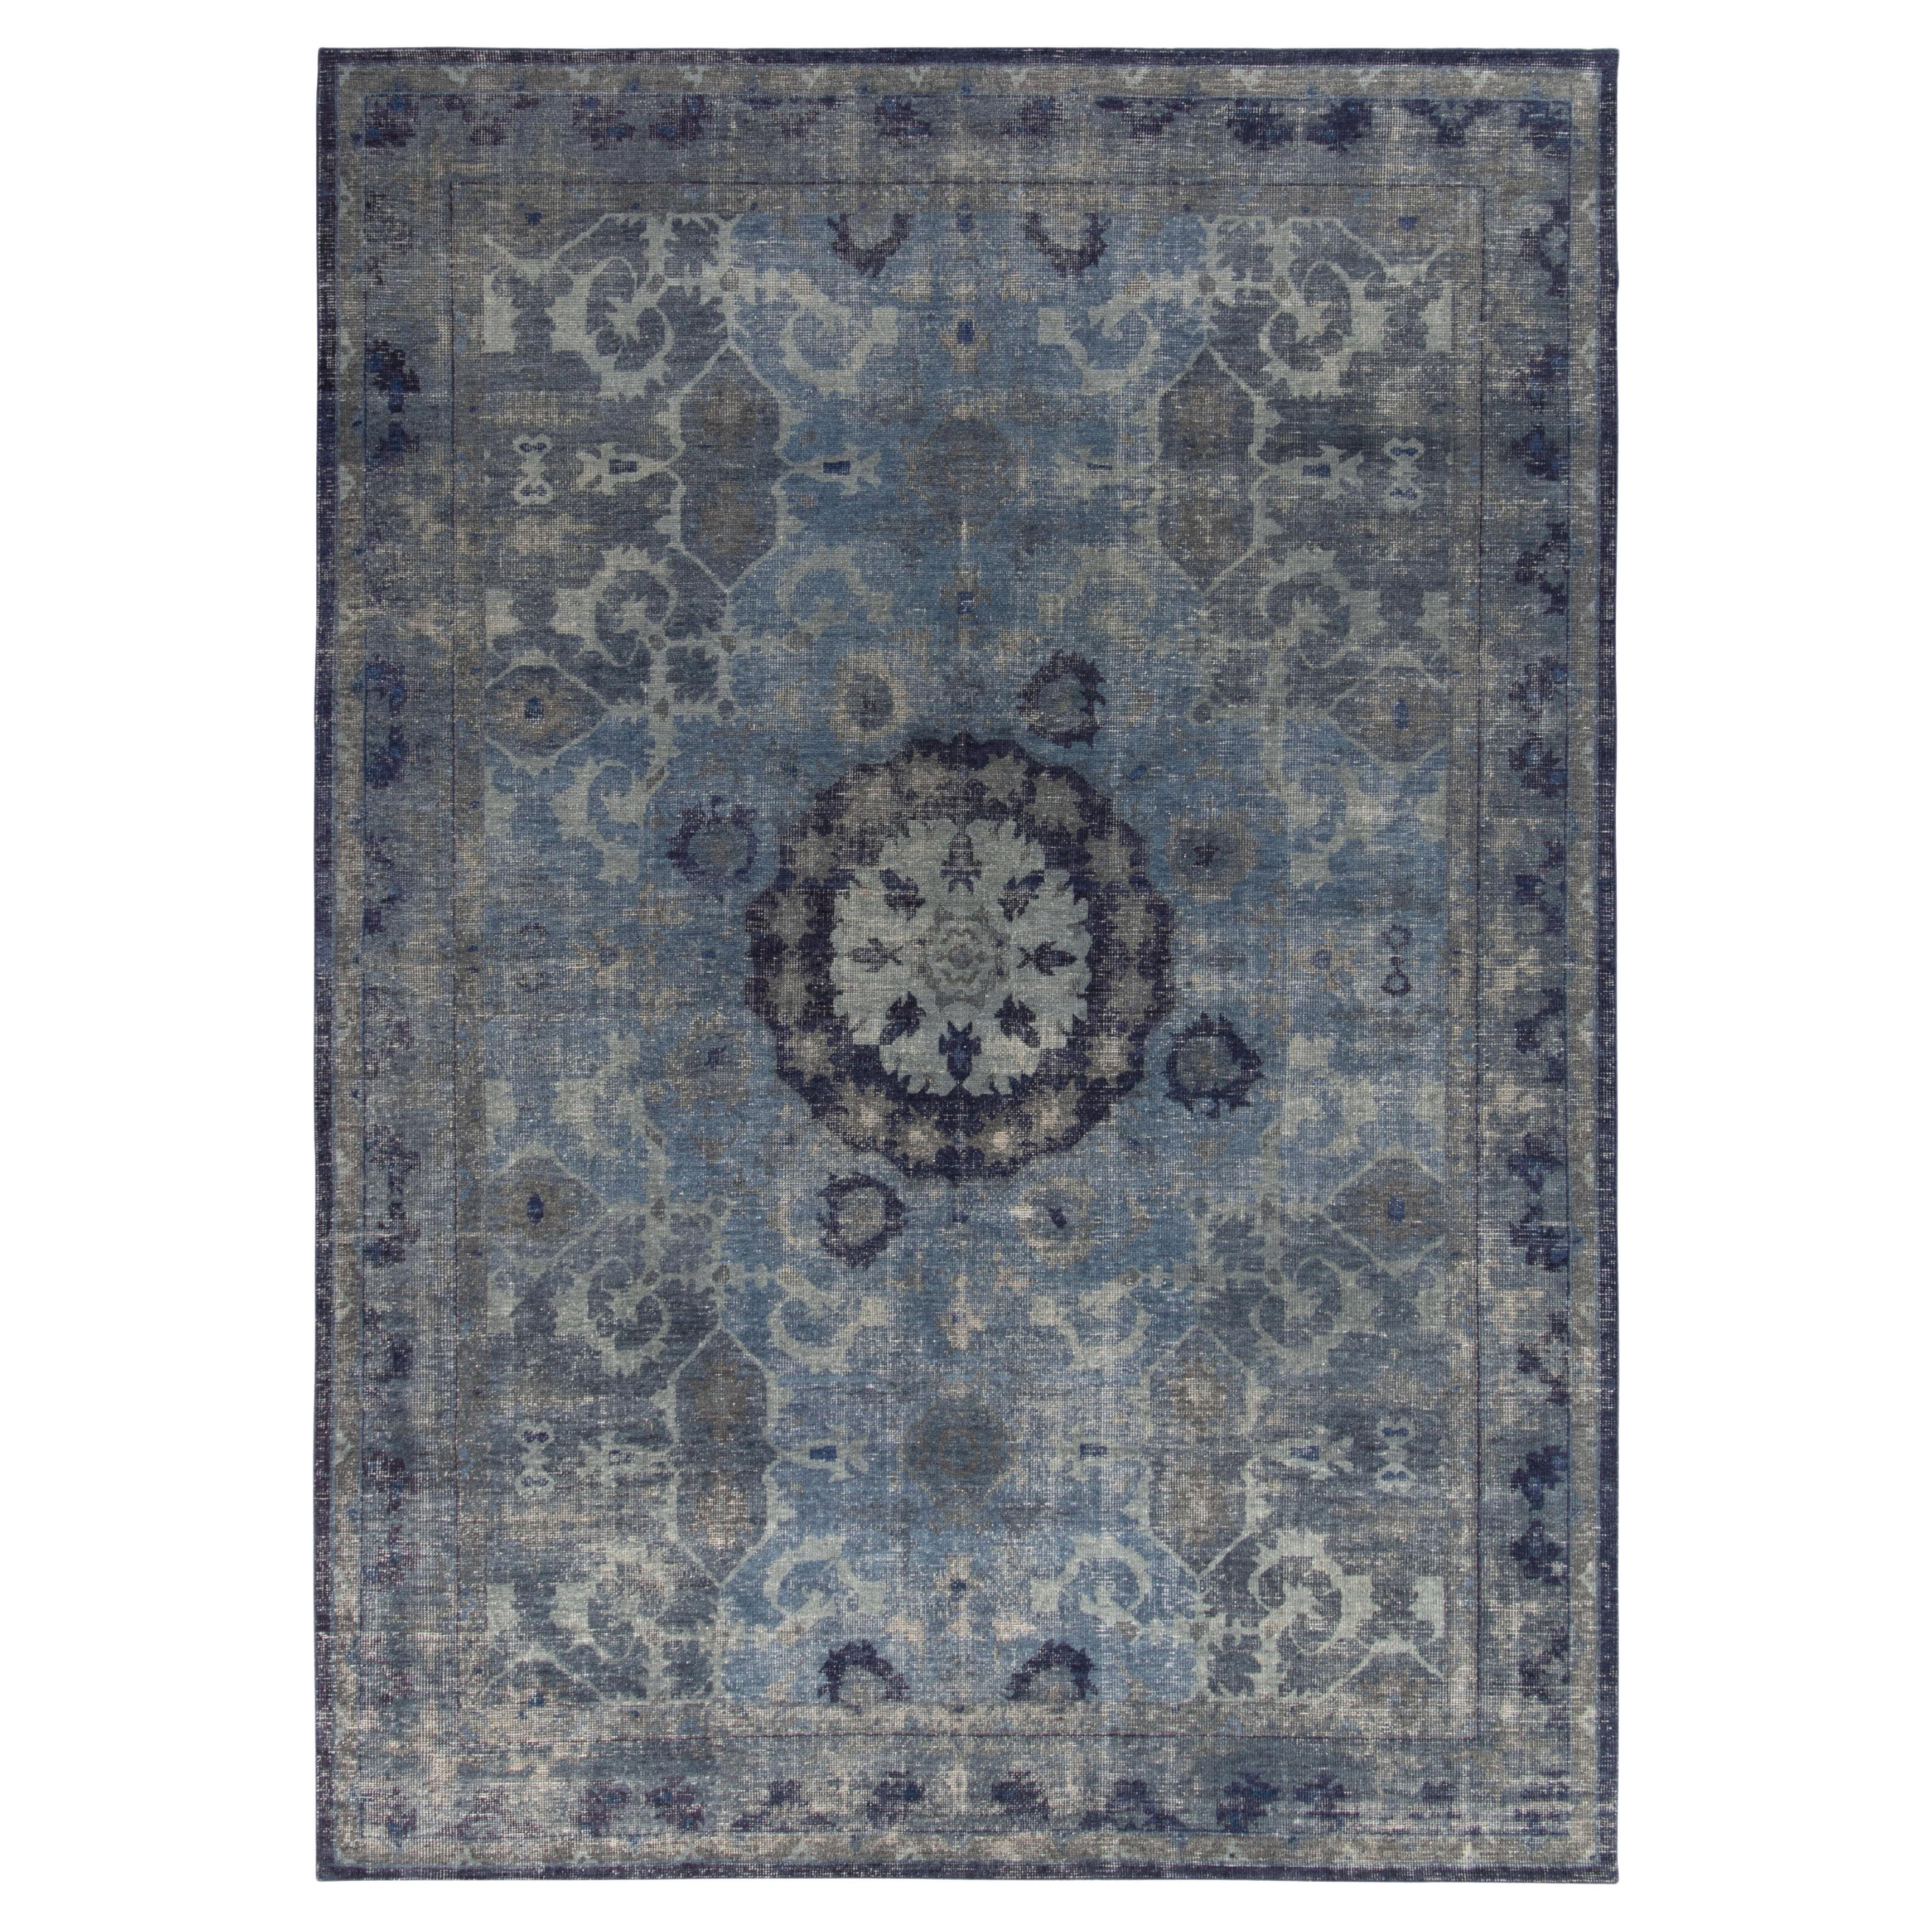 Teppich & Kilims Distressed Transitional Style Teppich in Blau, Grau mit Medaillonmuster